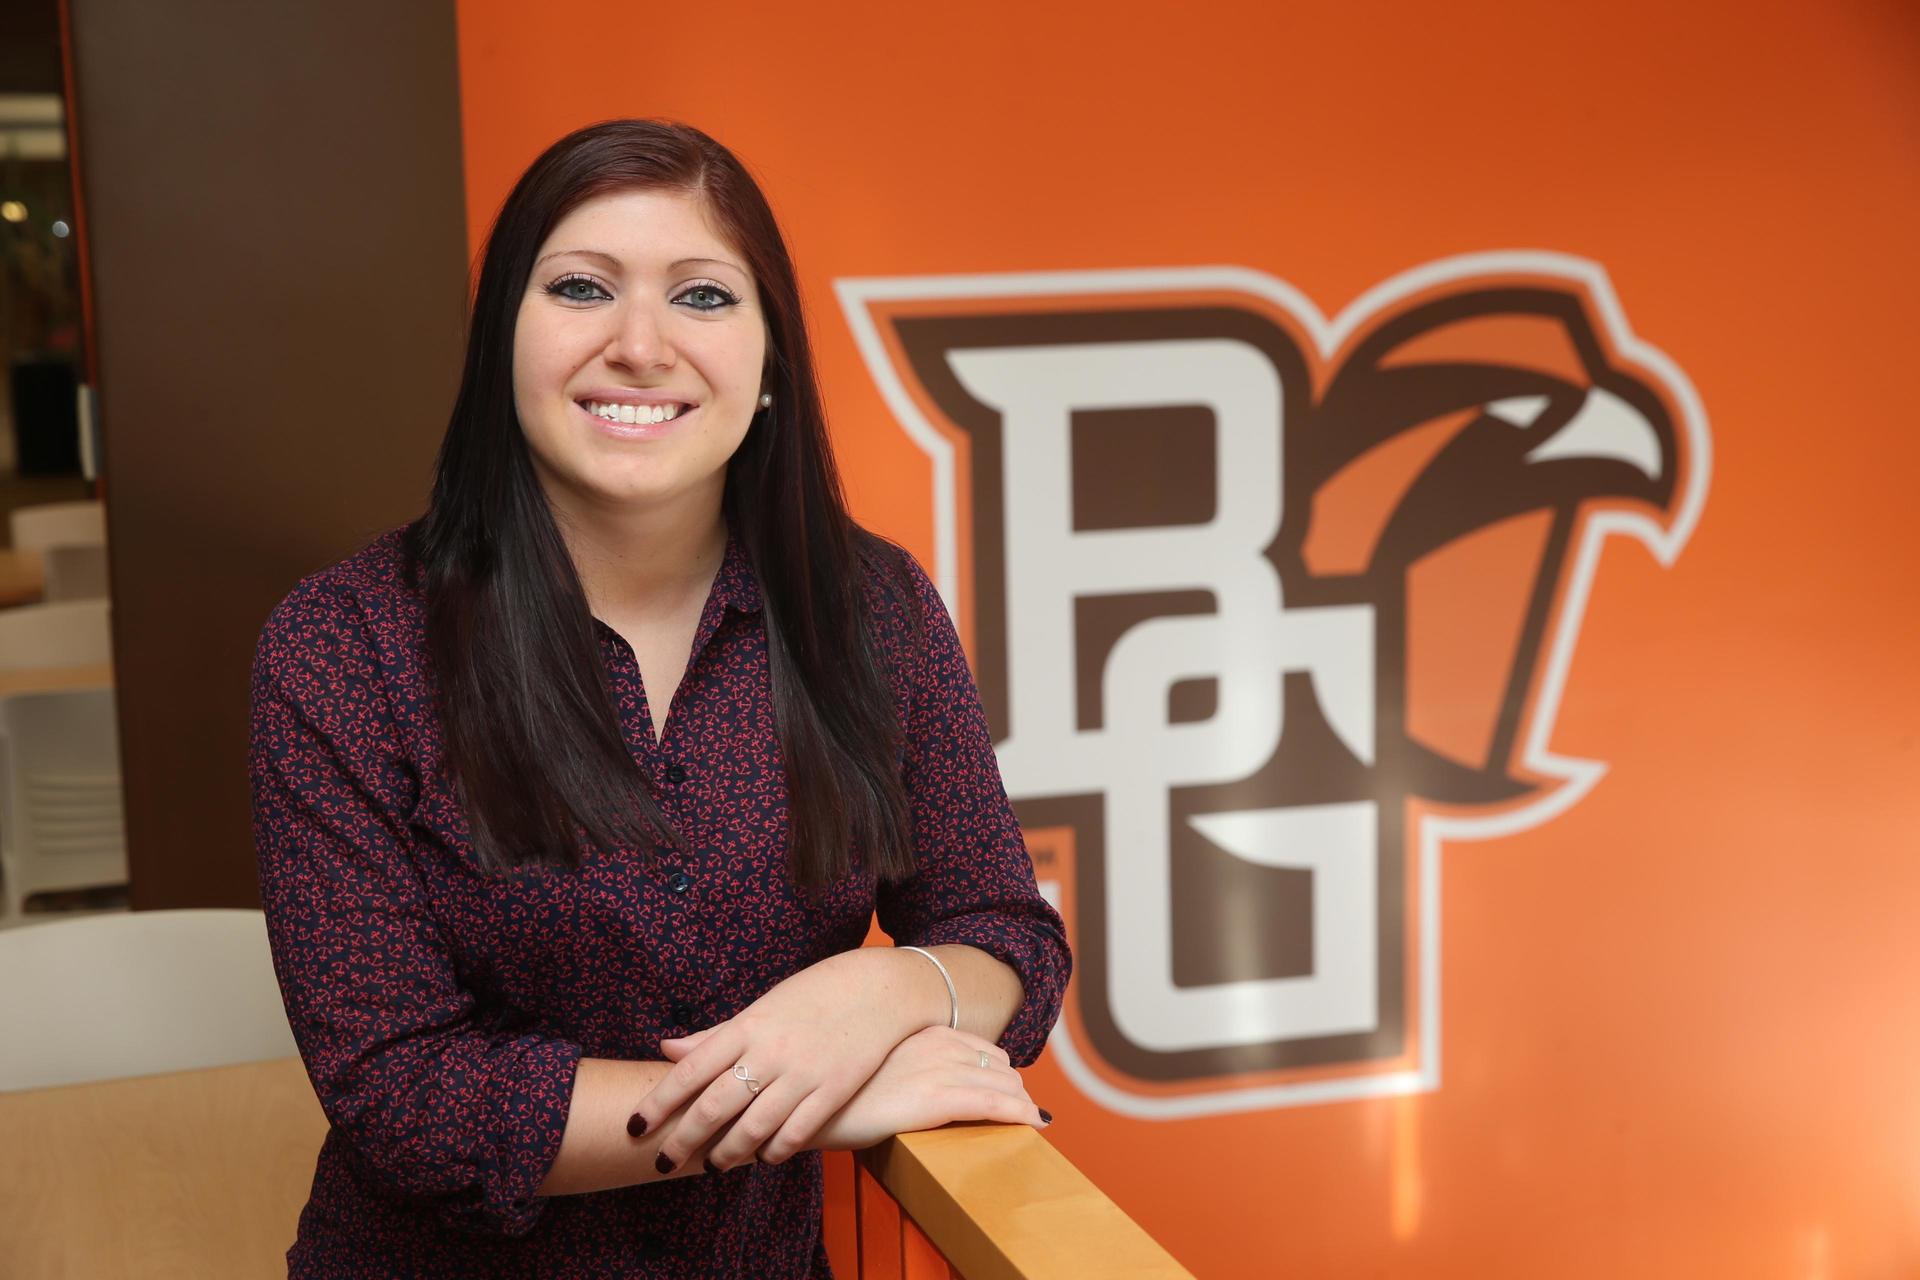 Veterans at BGSU can choose from over 75 graduate programs, some fully online, all welcoming to those who served.